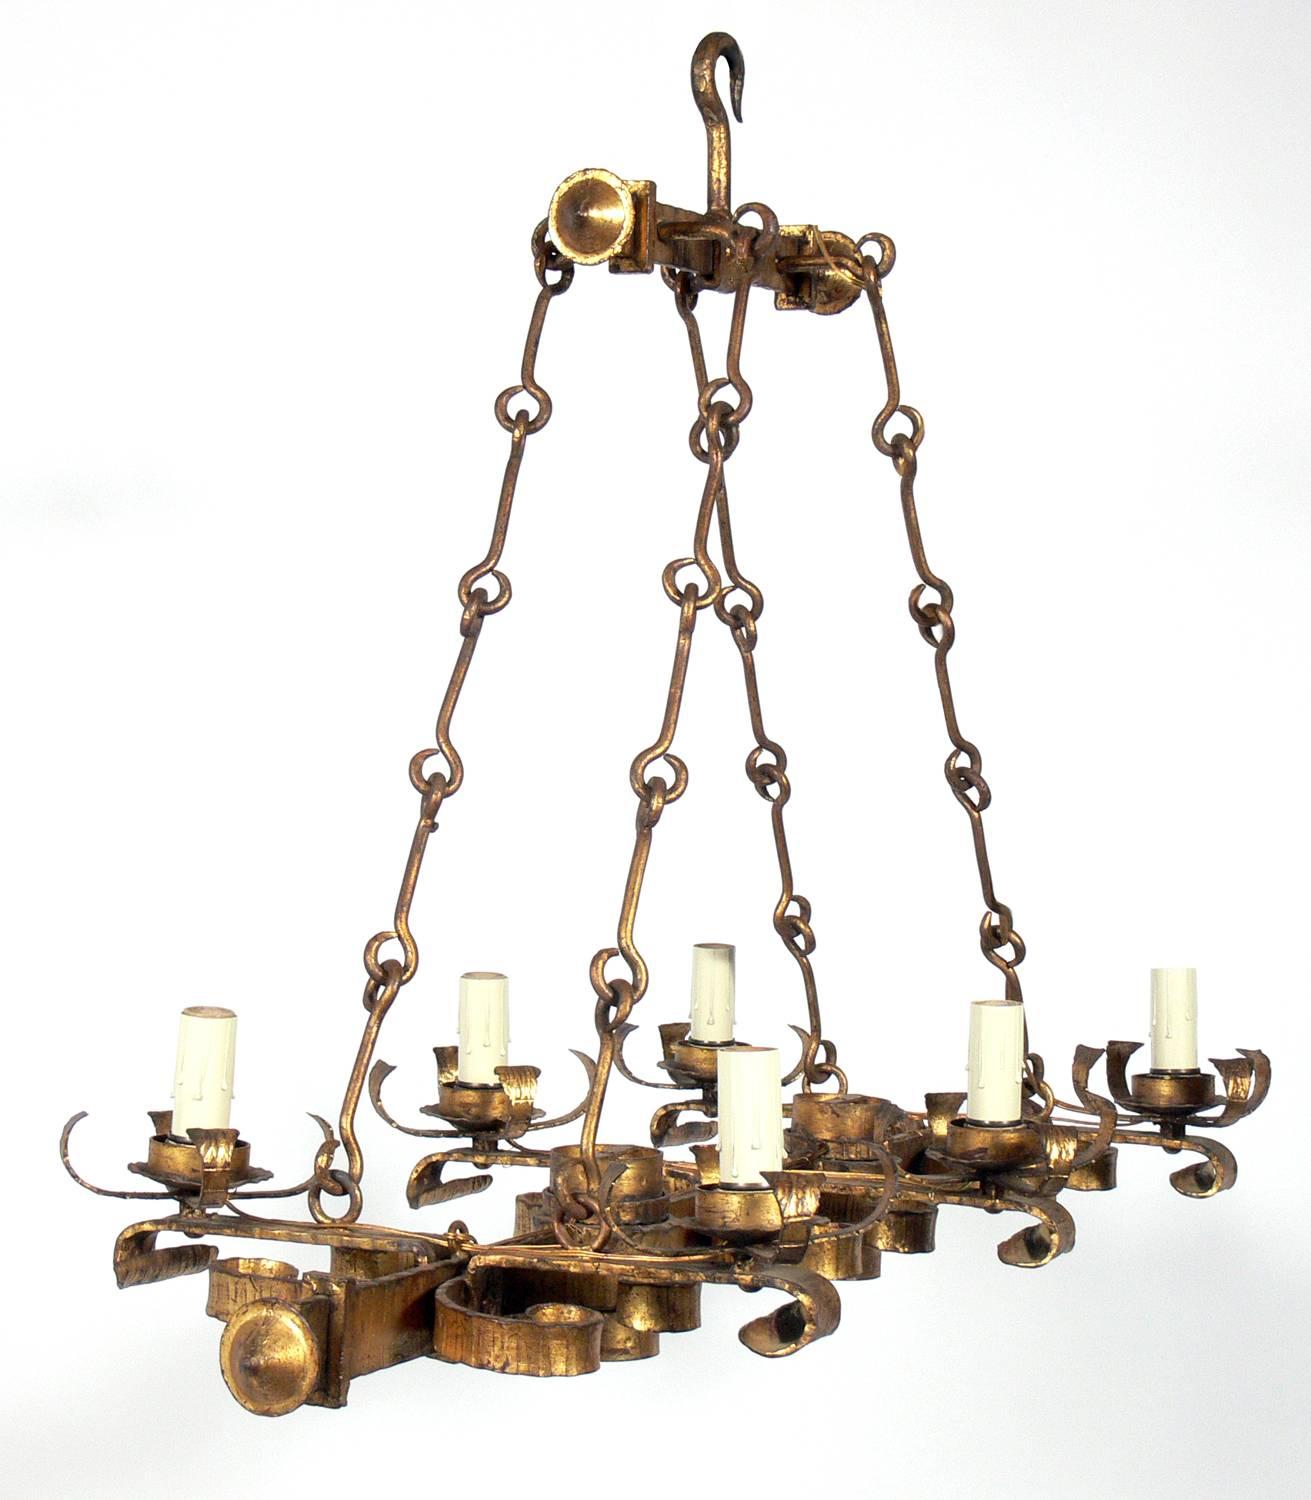 Elegant gilt iron chandelier, Spain, circa 1950s. This hanging chandelier has an elegant design and is very high quality, heavyweight construction. It has two down lights and four up lights. It has been rewired and is ready to use.